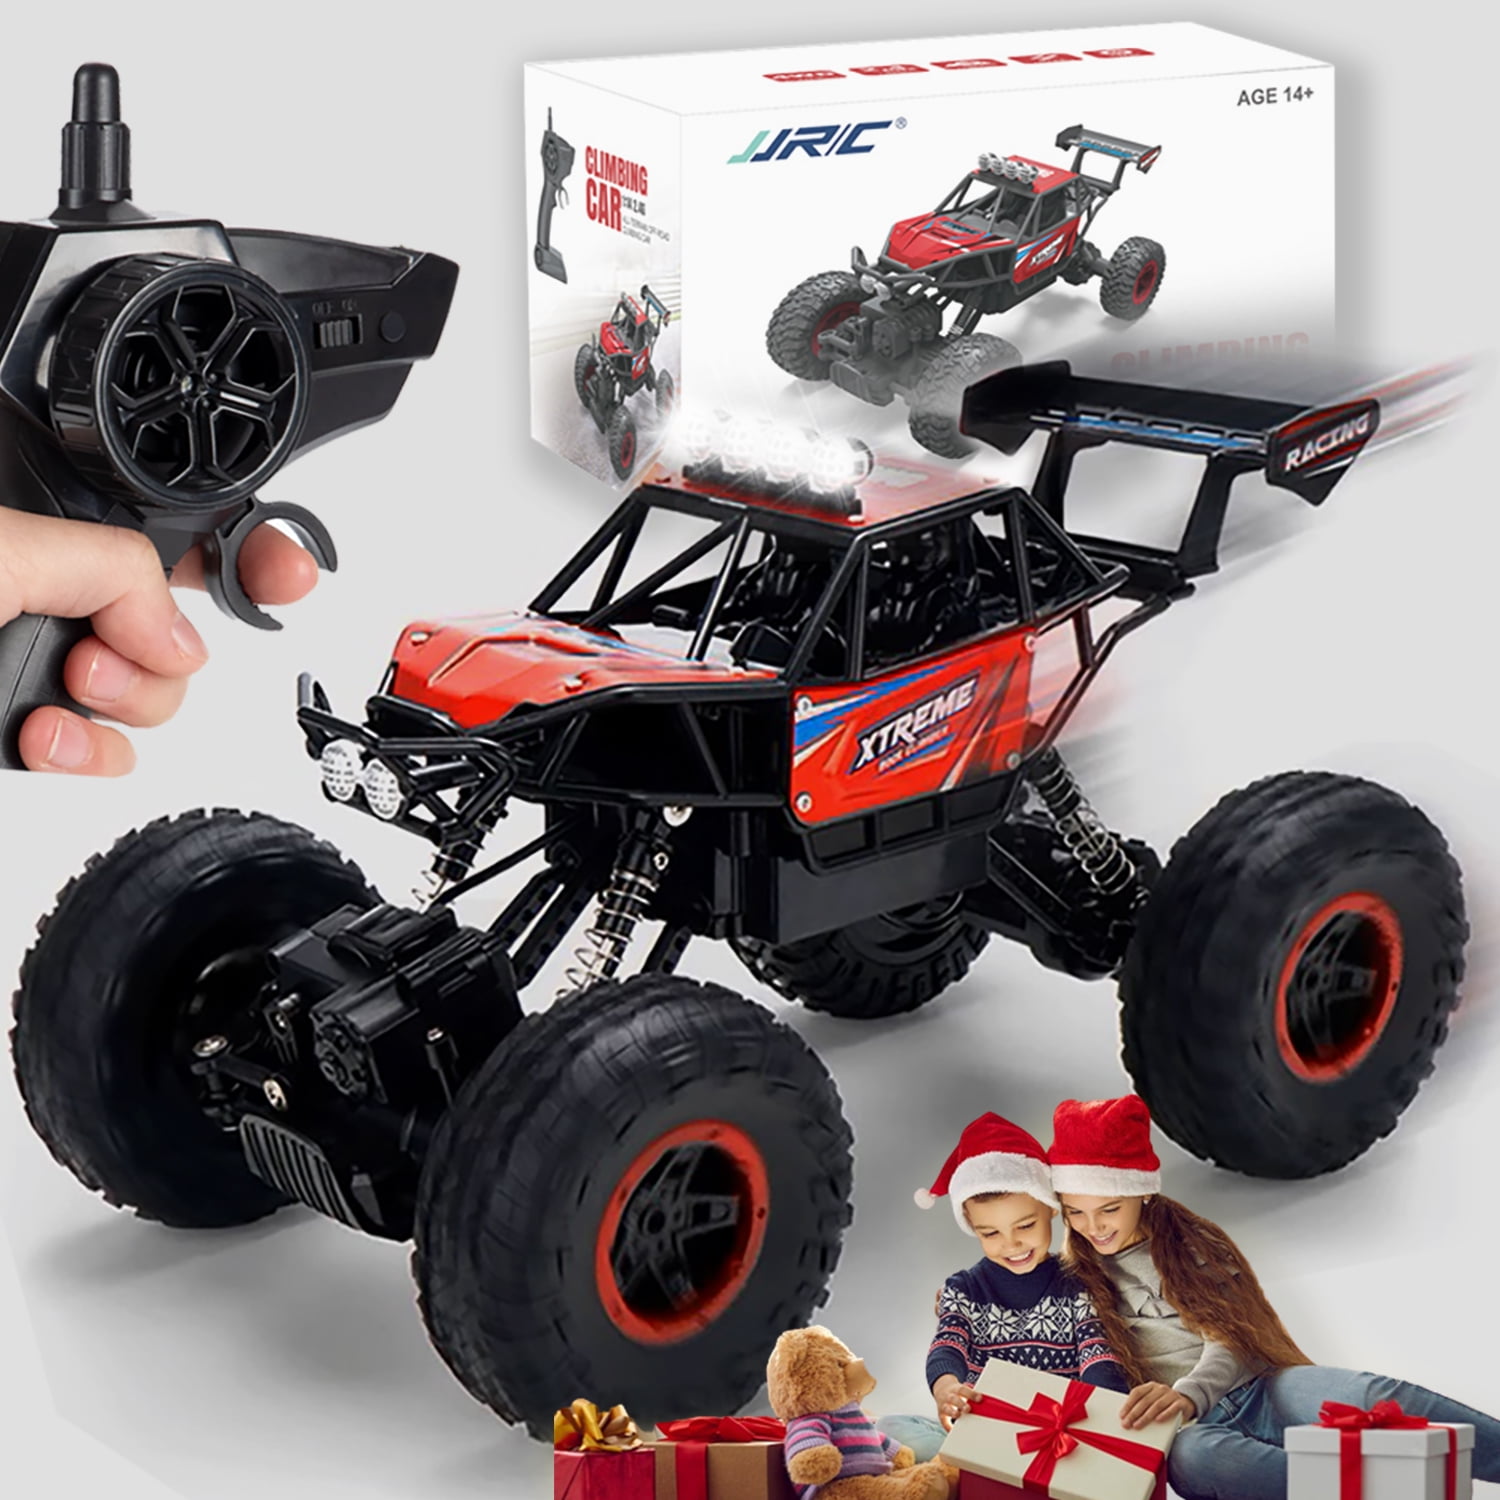 JJRC Q36 RC Car 4WD 18Mph4x4 Bugg 1:26 Scale Buggy Monster Car Toy Review 